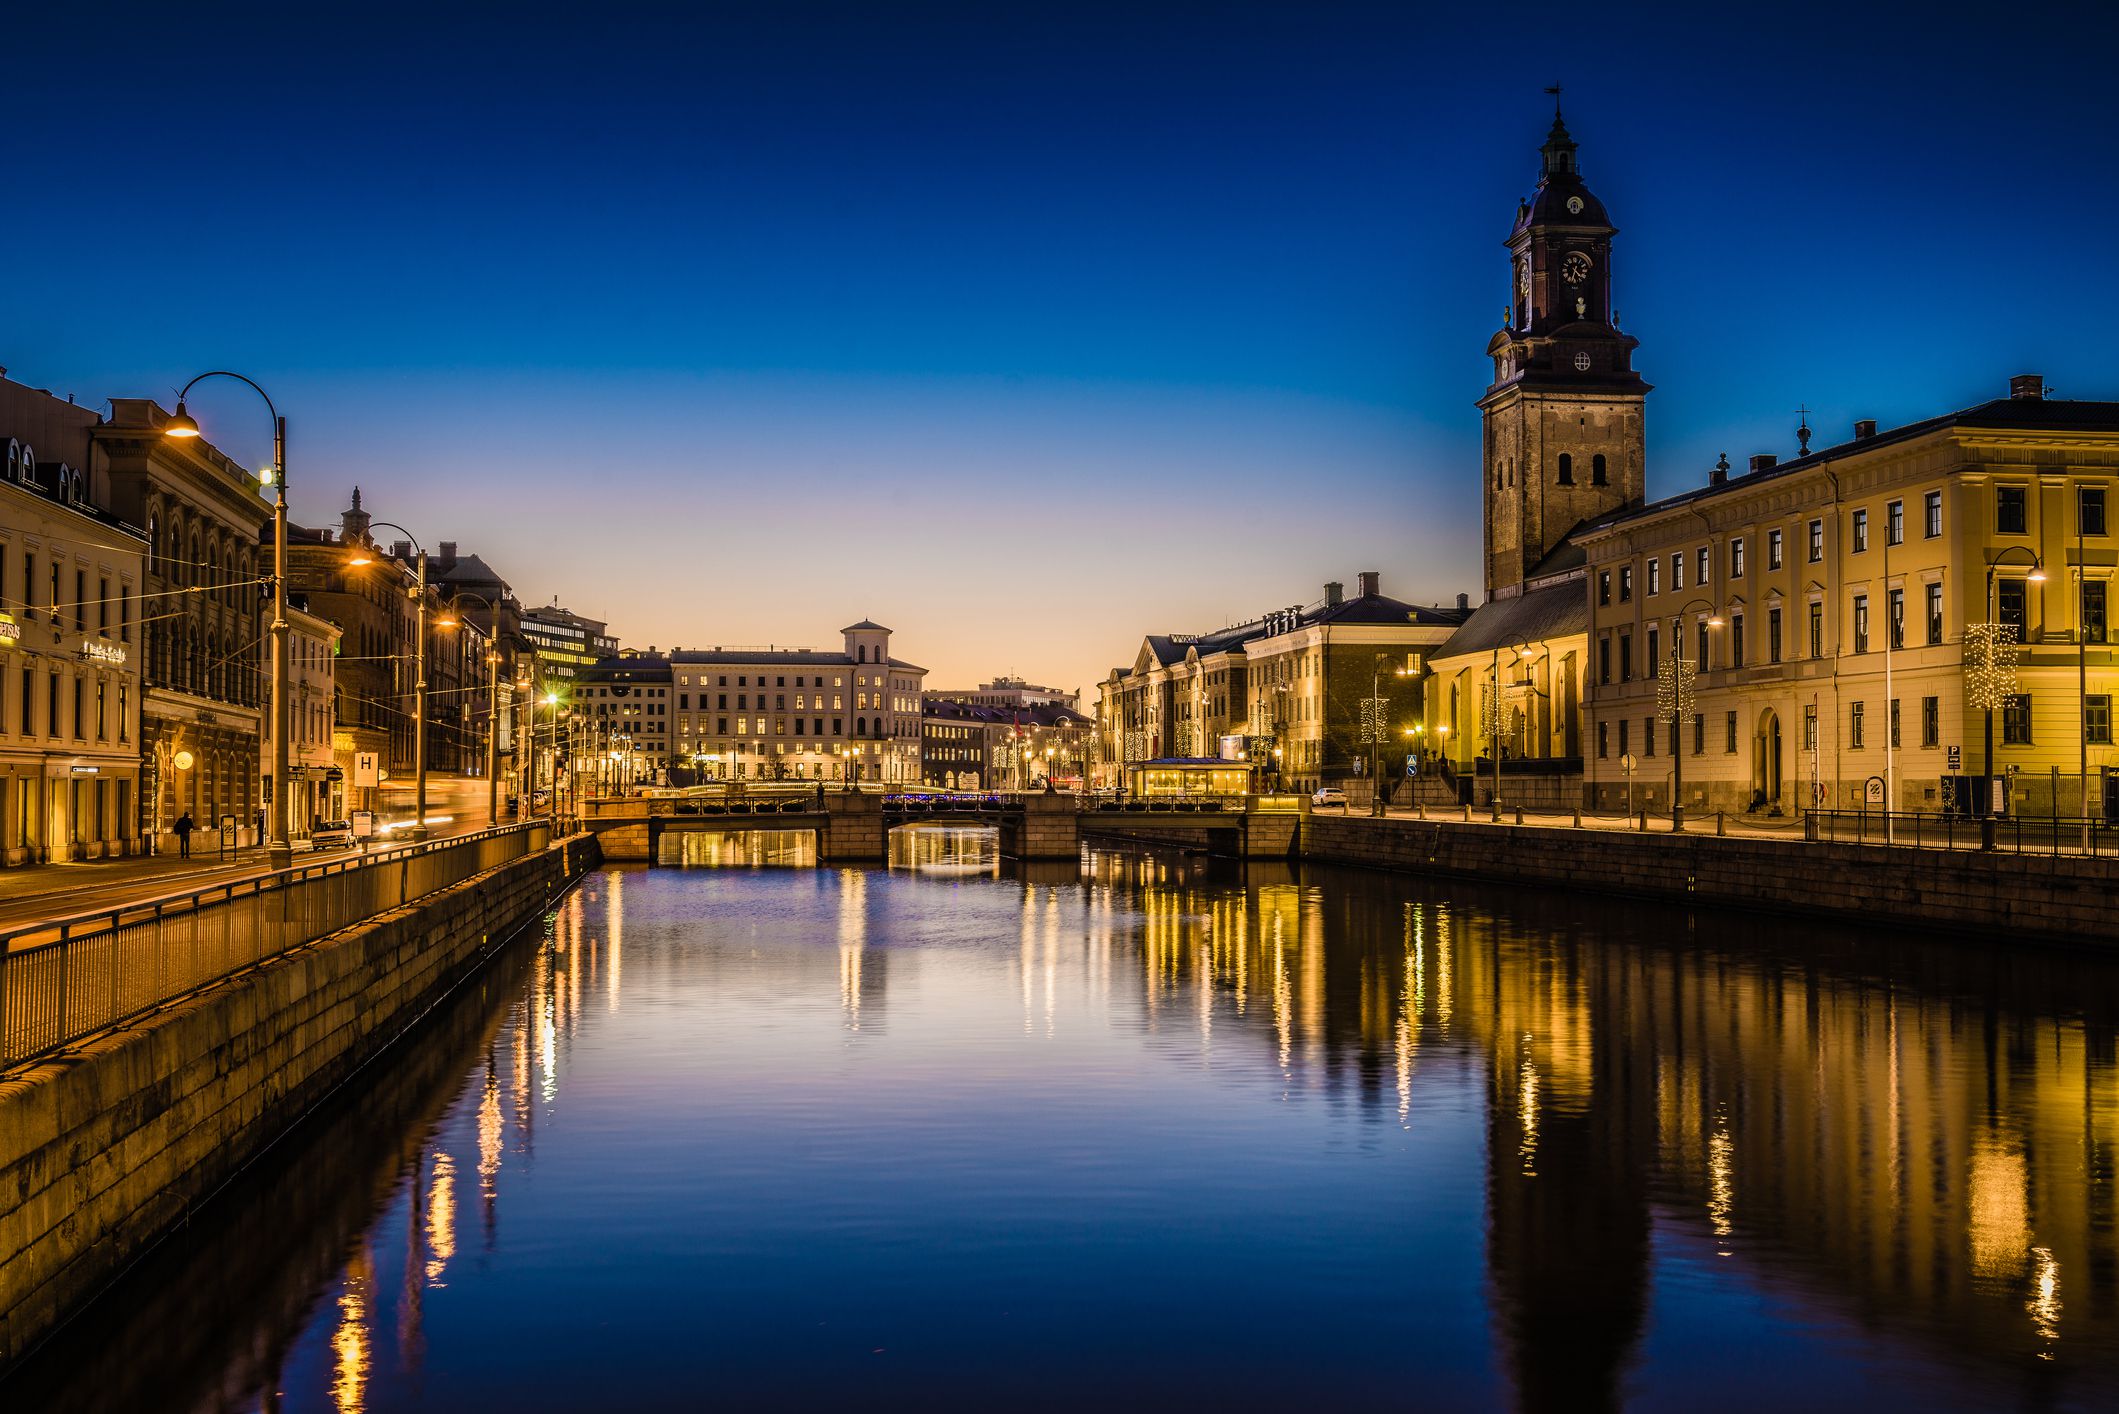 <p>Gothenburg, which just celebrated its 400th birthday, is another city that blends old world and new world attractions. It’s home to the Museum of Gothenburg, Jubilemsparken (or Centenary Park), biking trails and bridges and a myriad of high-end restaurants. </p>